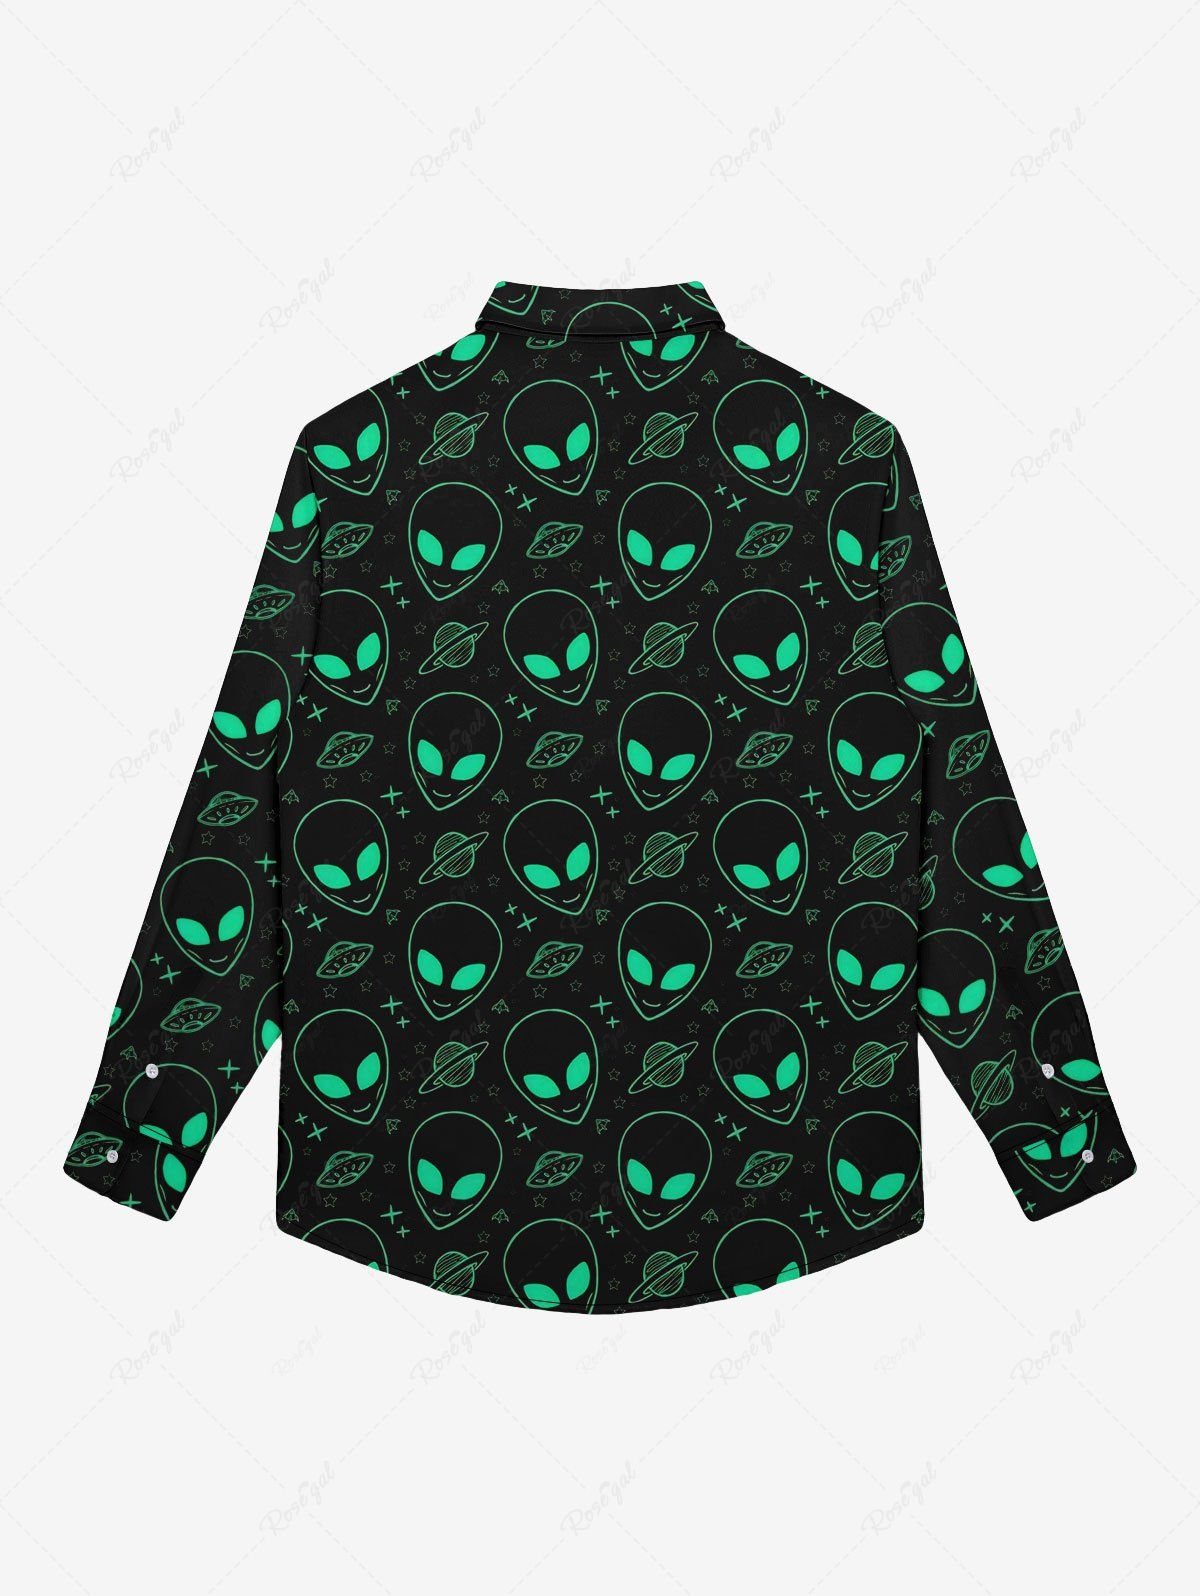 Gothic Turn-down Collar Alien UFO Planet Print Buttons Shirt For Men